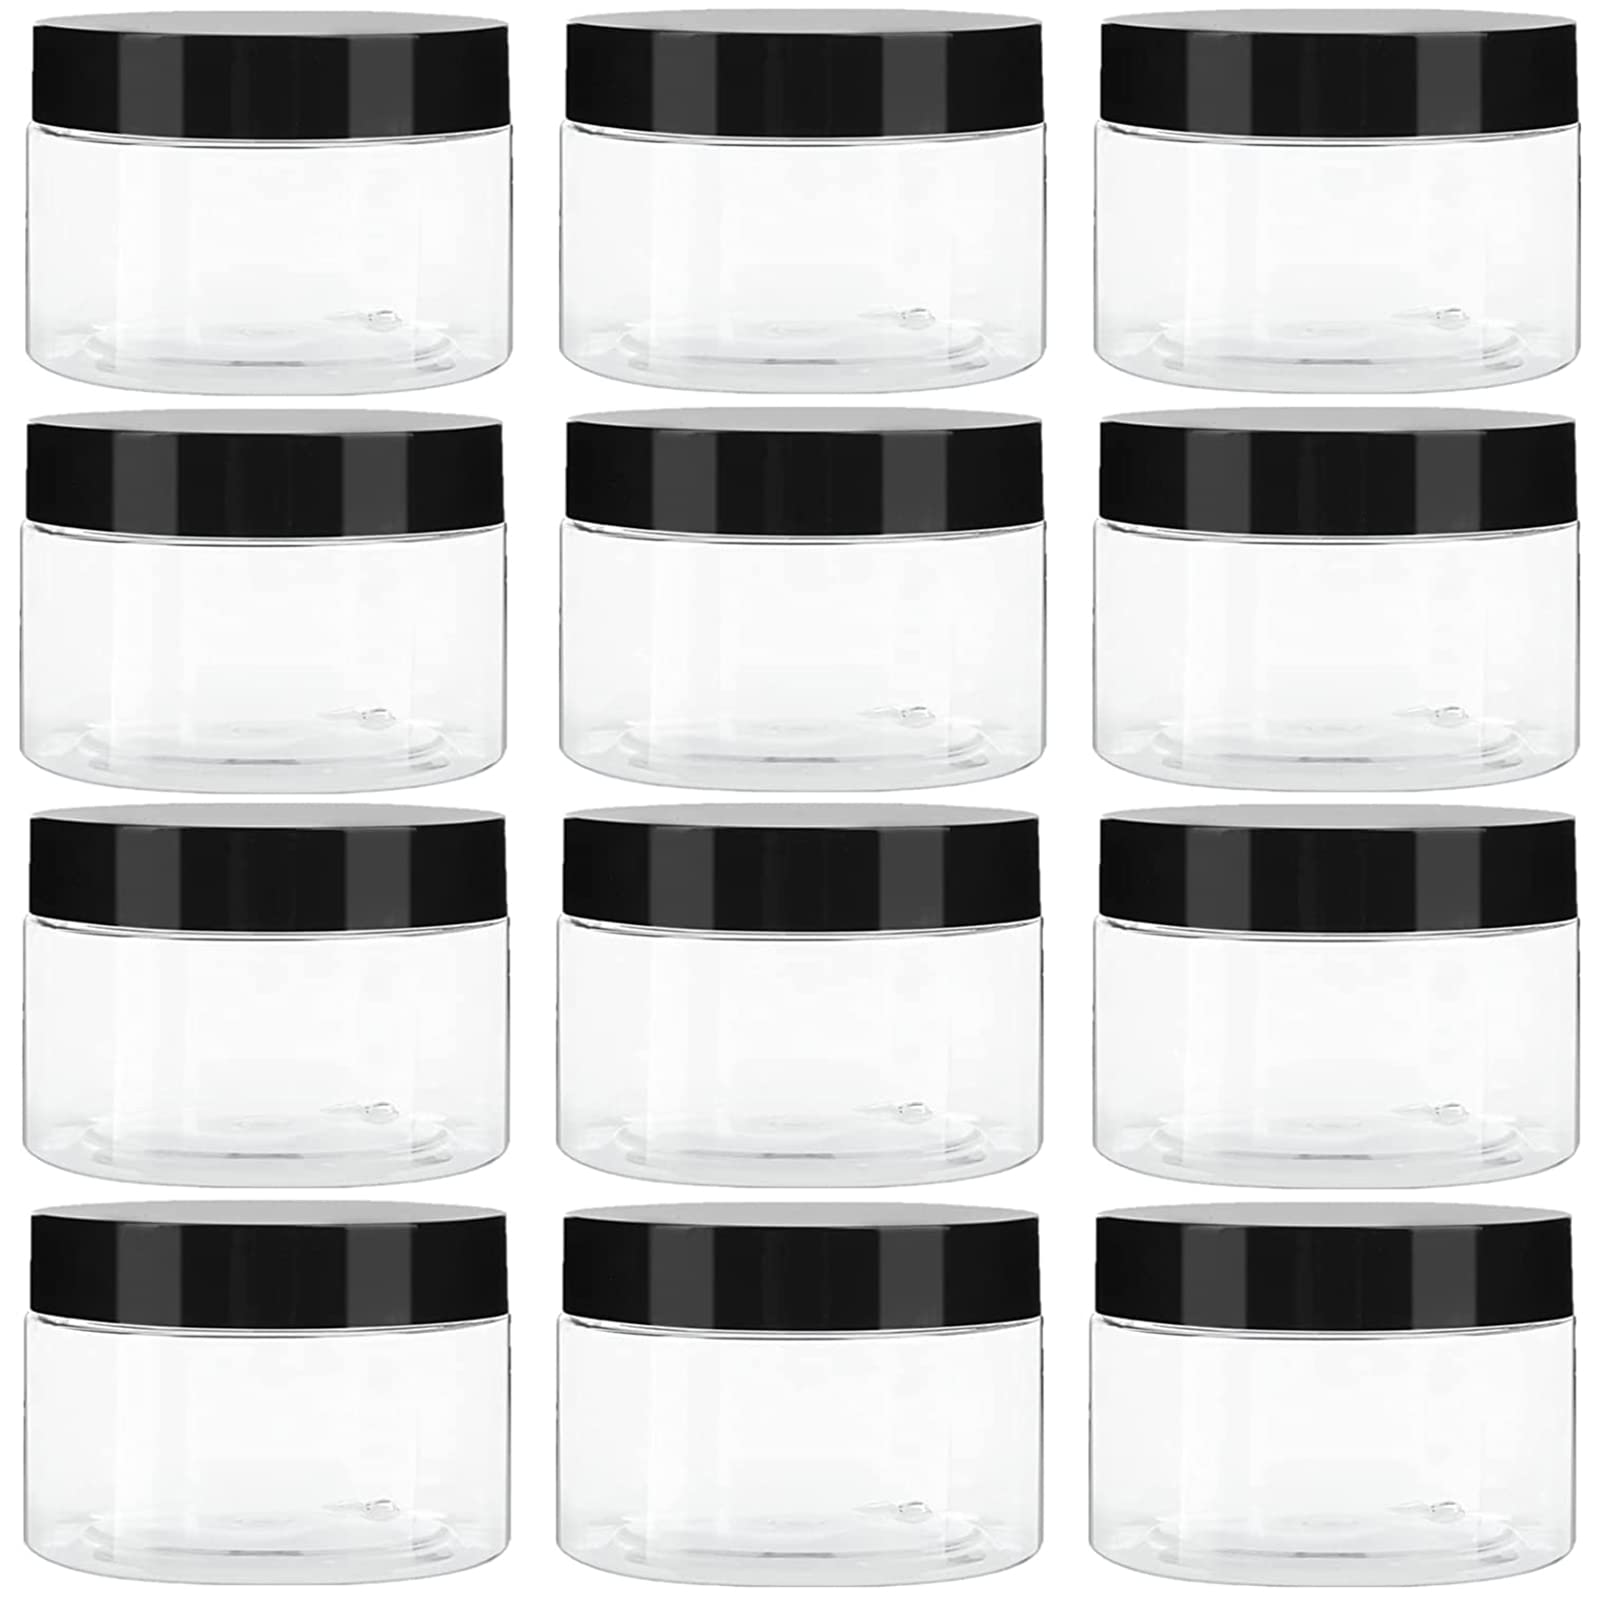  36 Pack 4 Oz Plastic Container Jars with Lids and Labels BPA  Free, TUZAZO Empty Round Clear Cosmetic Containers Plastic Slime Jars for  Lotion, Cream, Ointments, Body Butter, Makeup, Travel Storage (